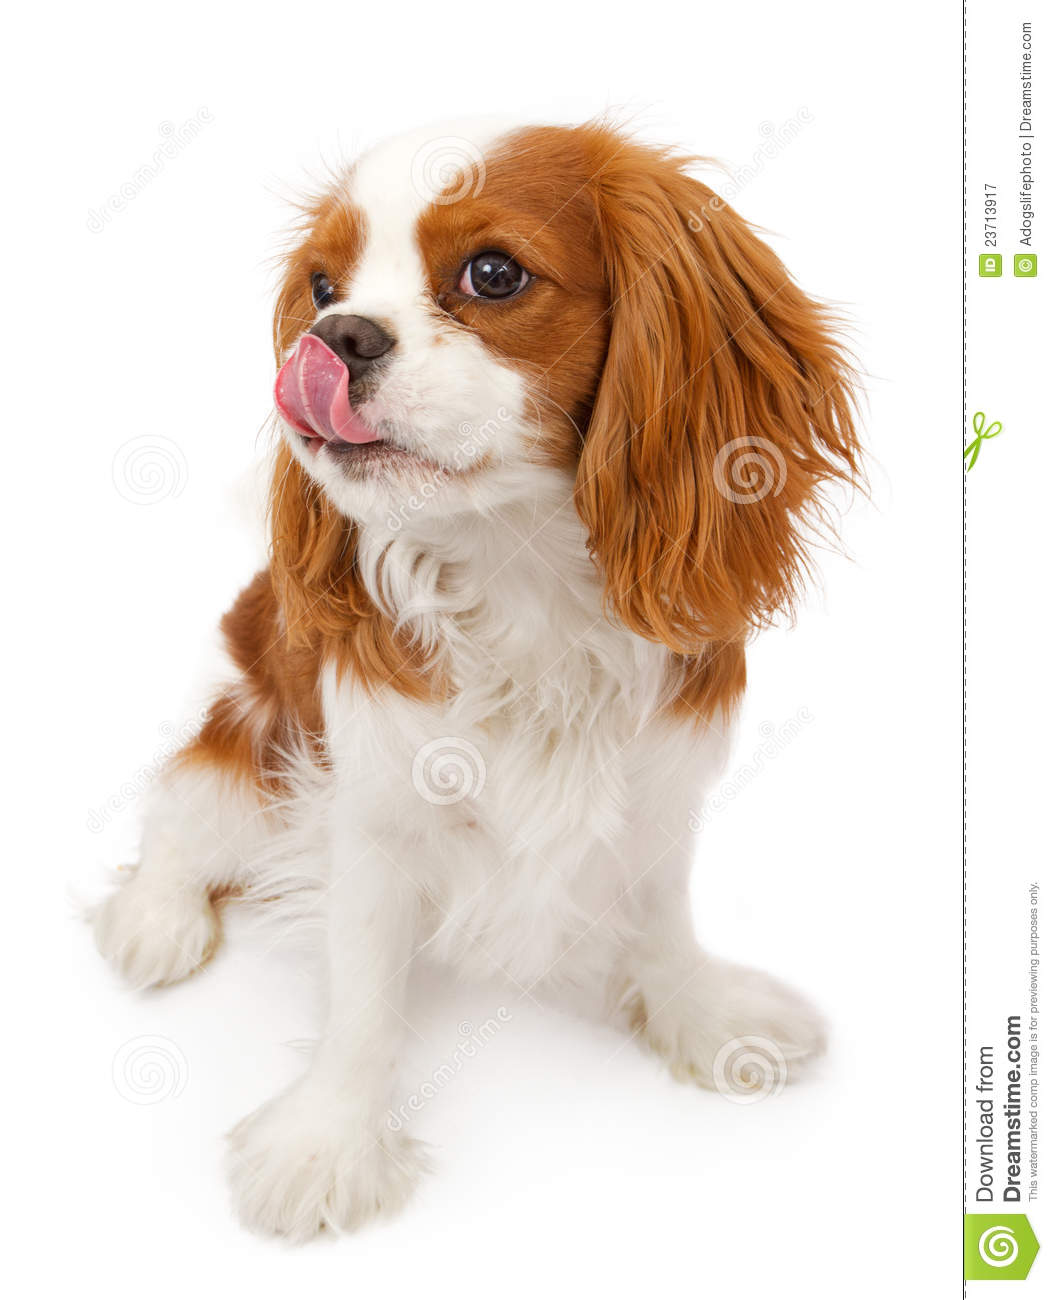 Cavalier king charles clipart.